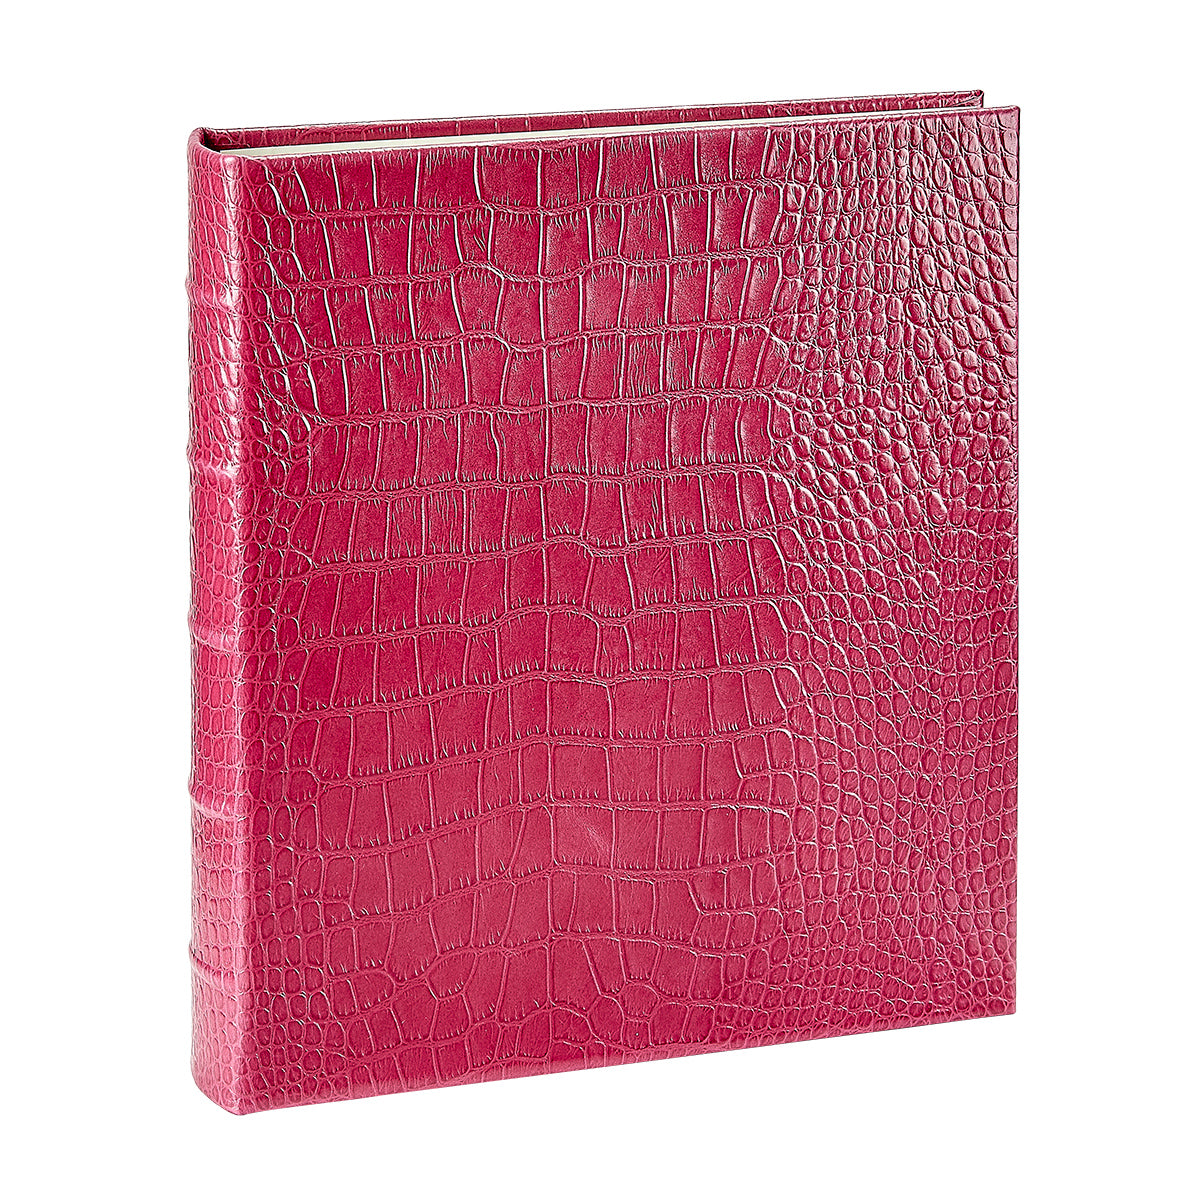 Graphic Image Large Ring Clear Pocket Album Pink Embossed Crocodile Leather